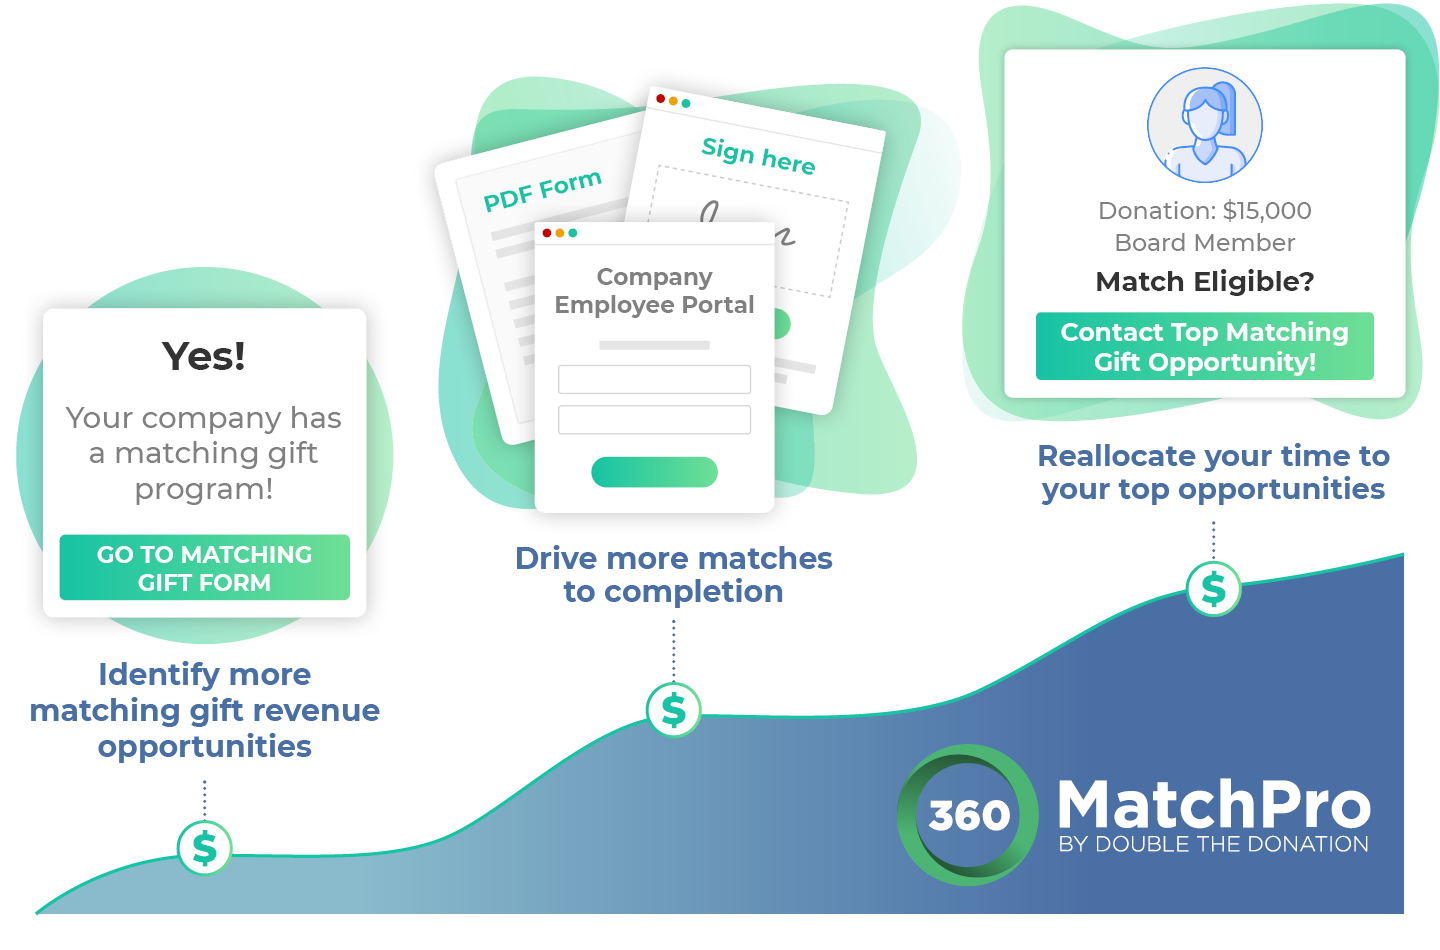 This image lists the features of 360MatchPro, which also appear in the text below. The image also shows an increasing line graph to depict growing donations. 